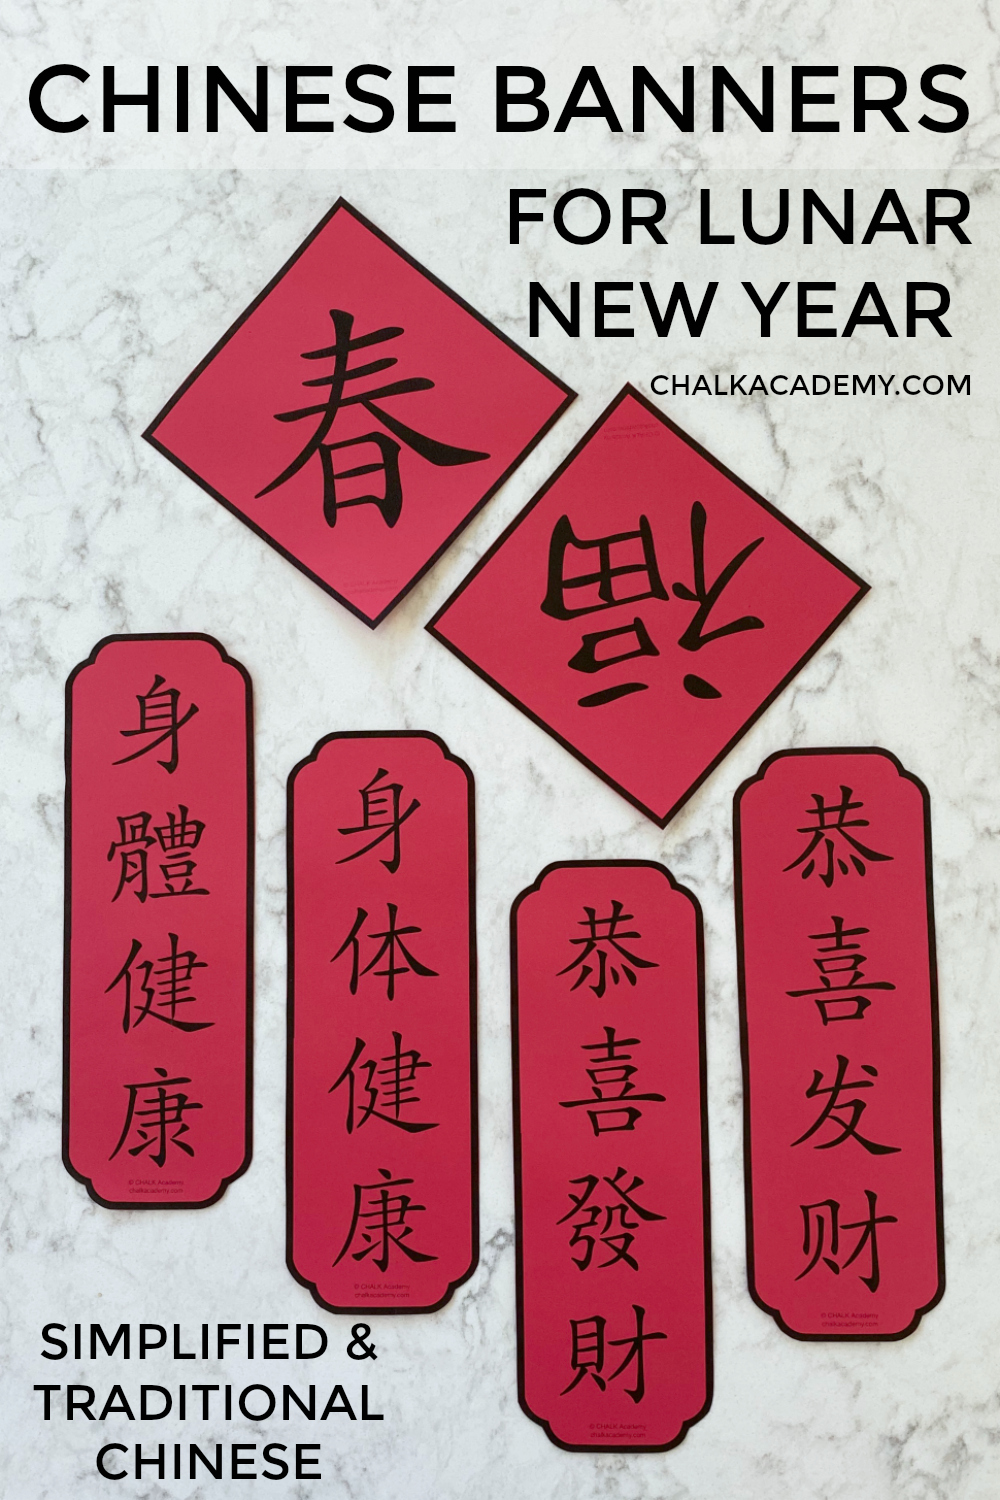 Chinese New Year Banners Simplified and Traditional Chinese Printable